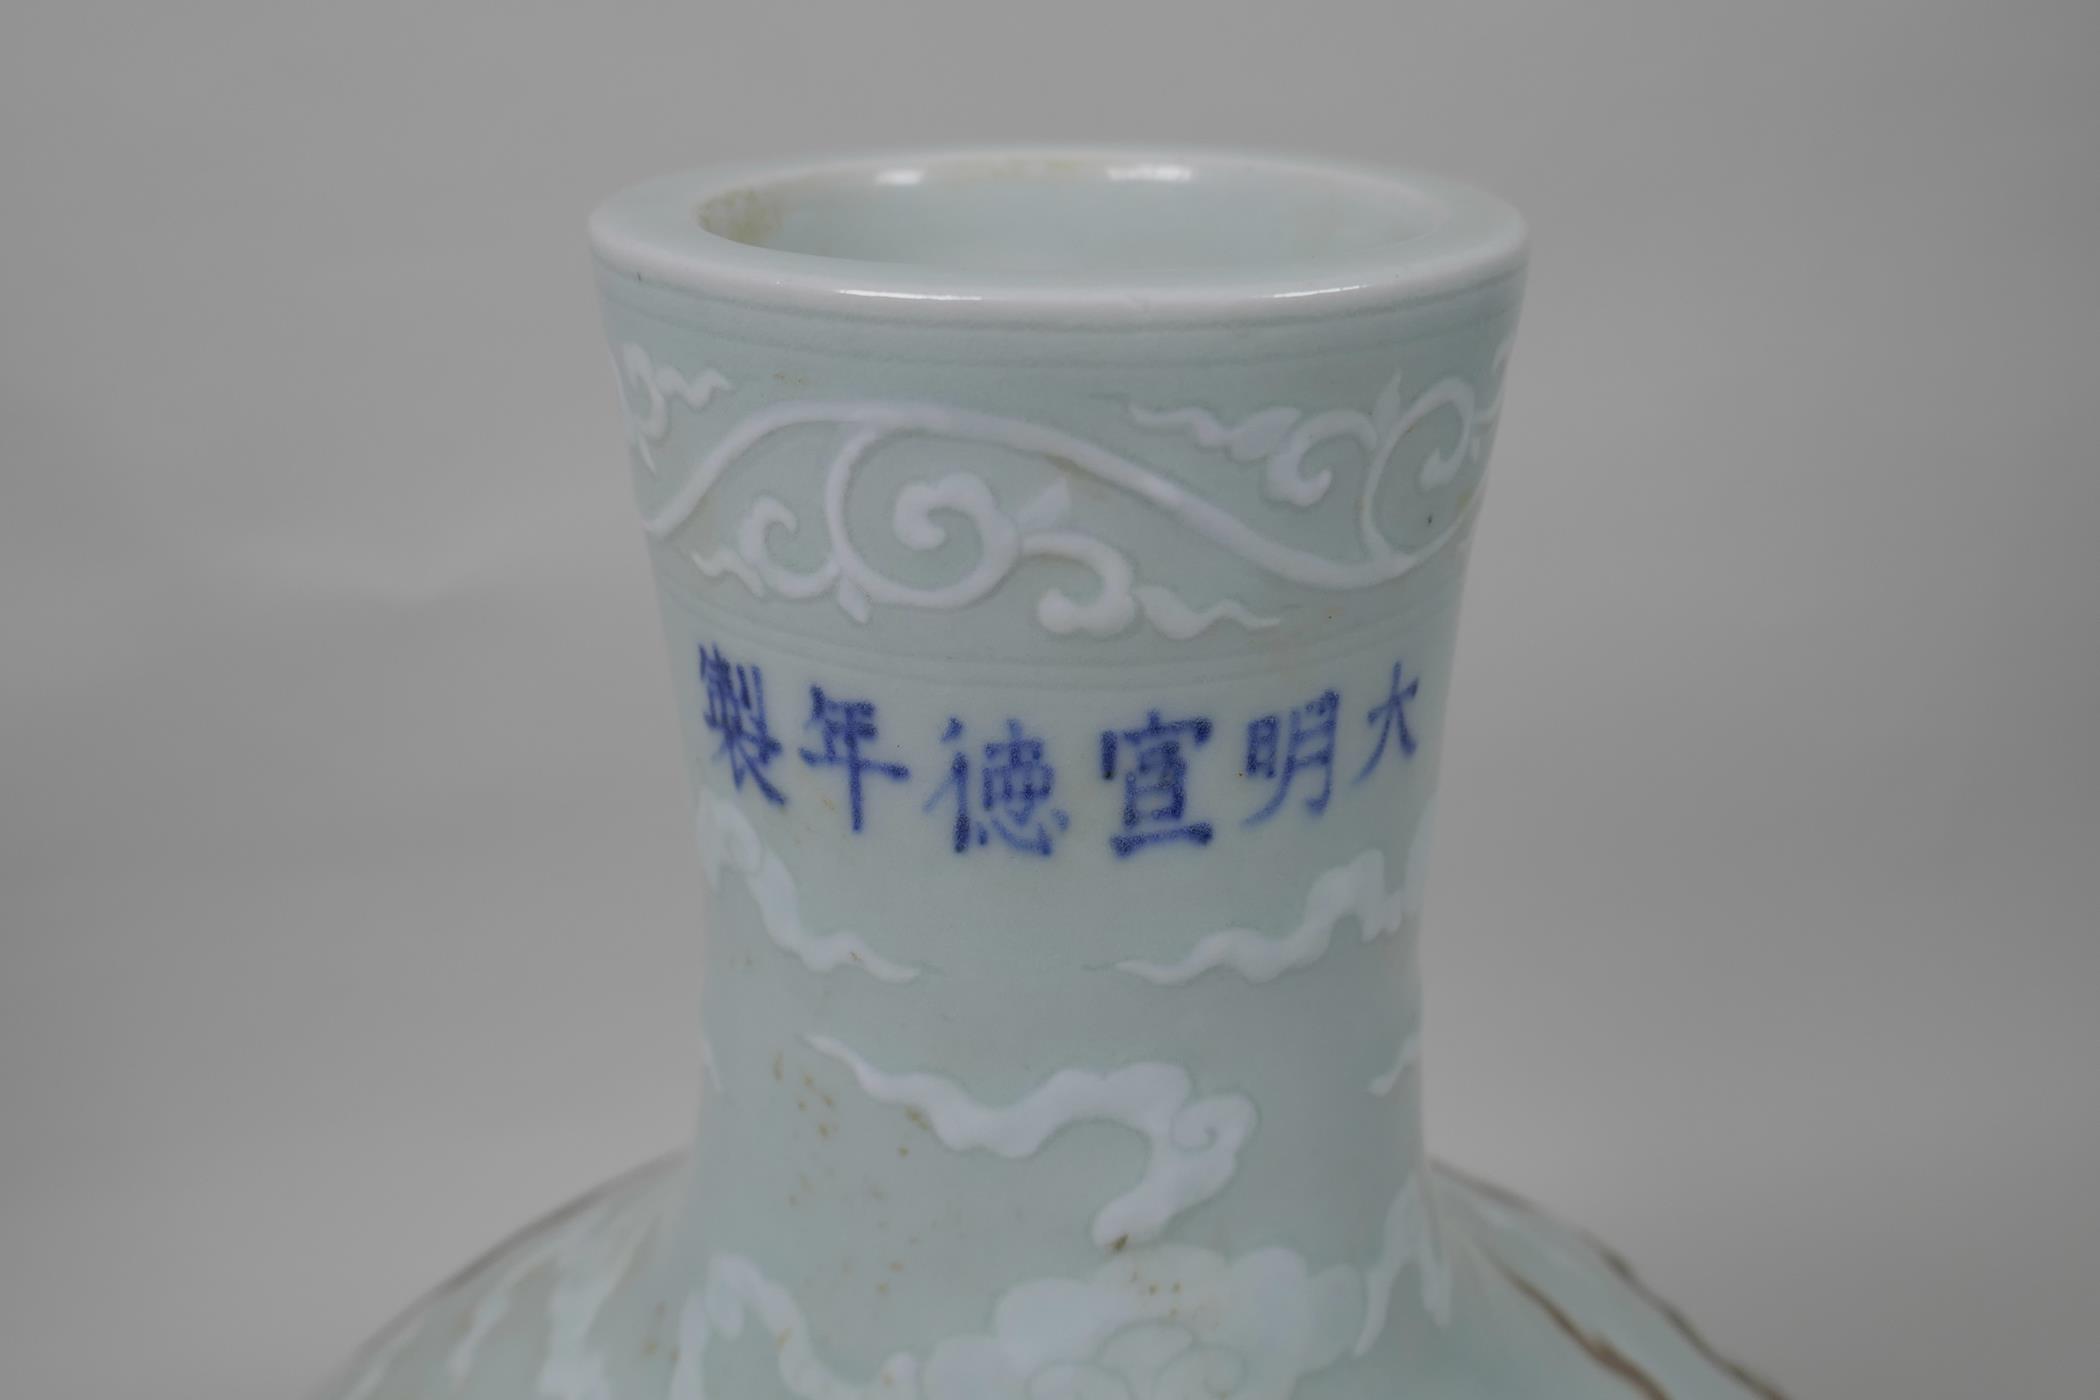 A Chinese Ming style red and white porcelain vase decorated with a red dragon in flight, 6 character - Image 4 of 5